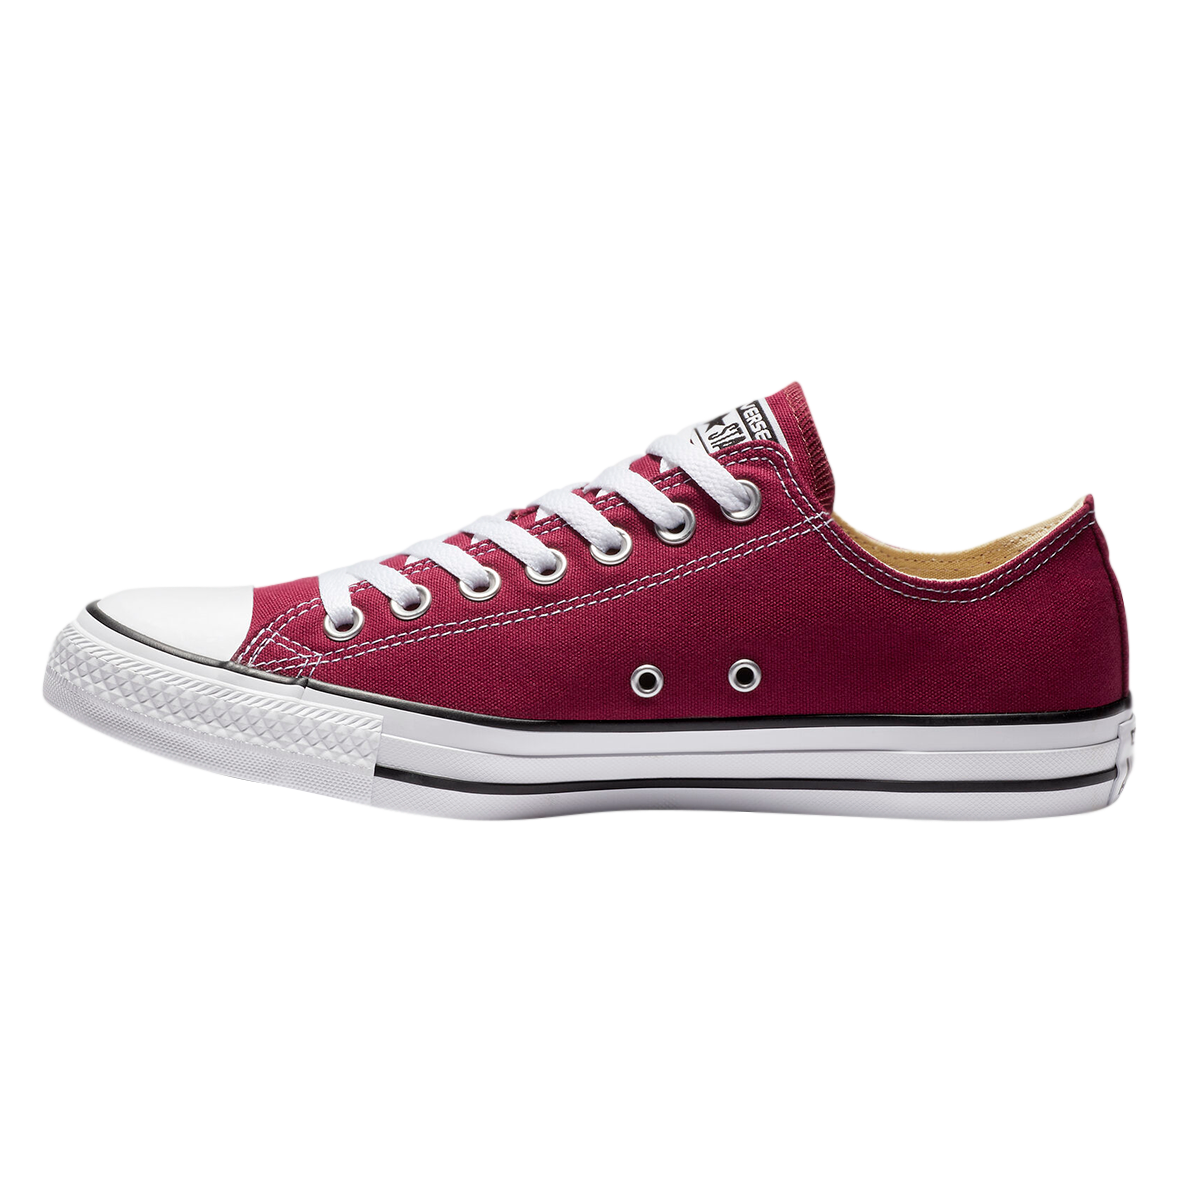 CONVERSE CHUCK TAYLR ALL STAR UNISEX COLOR - 0